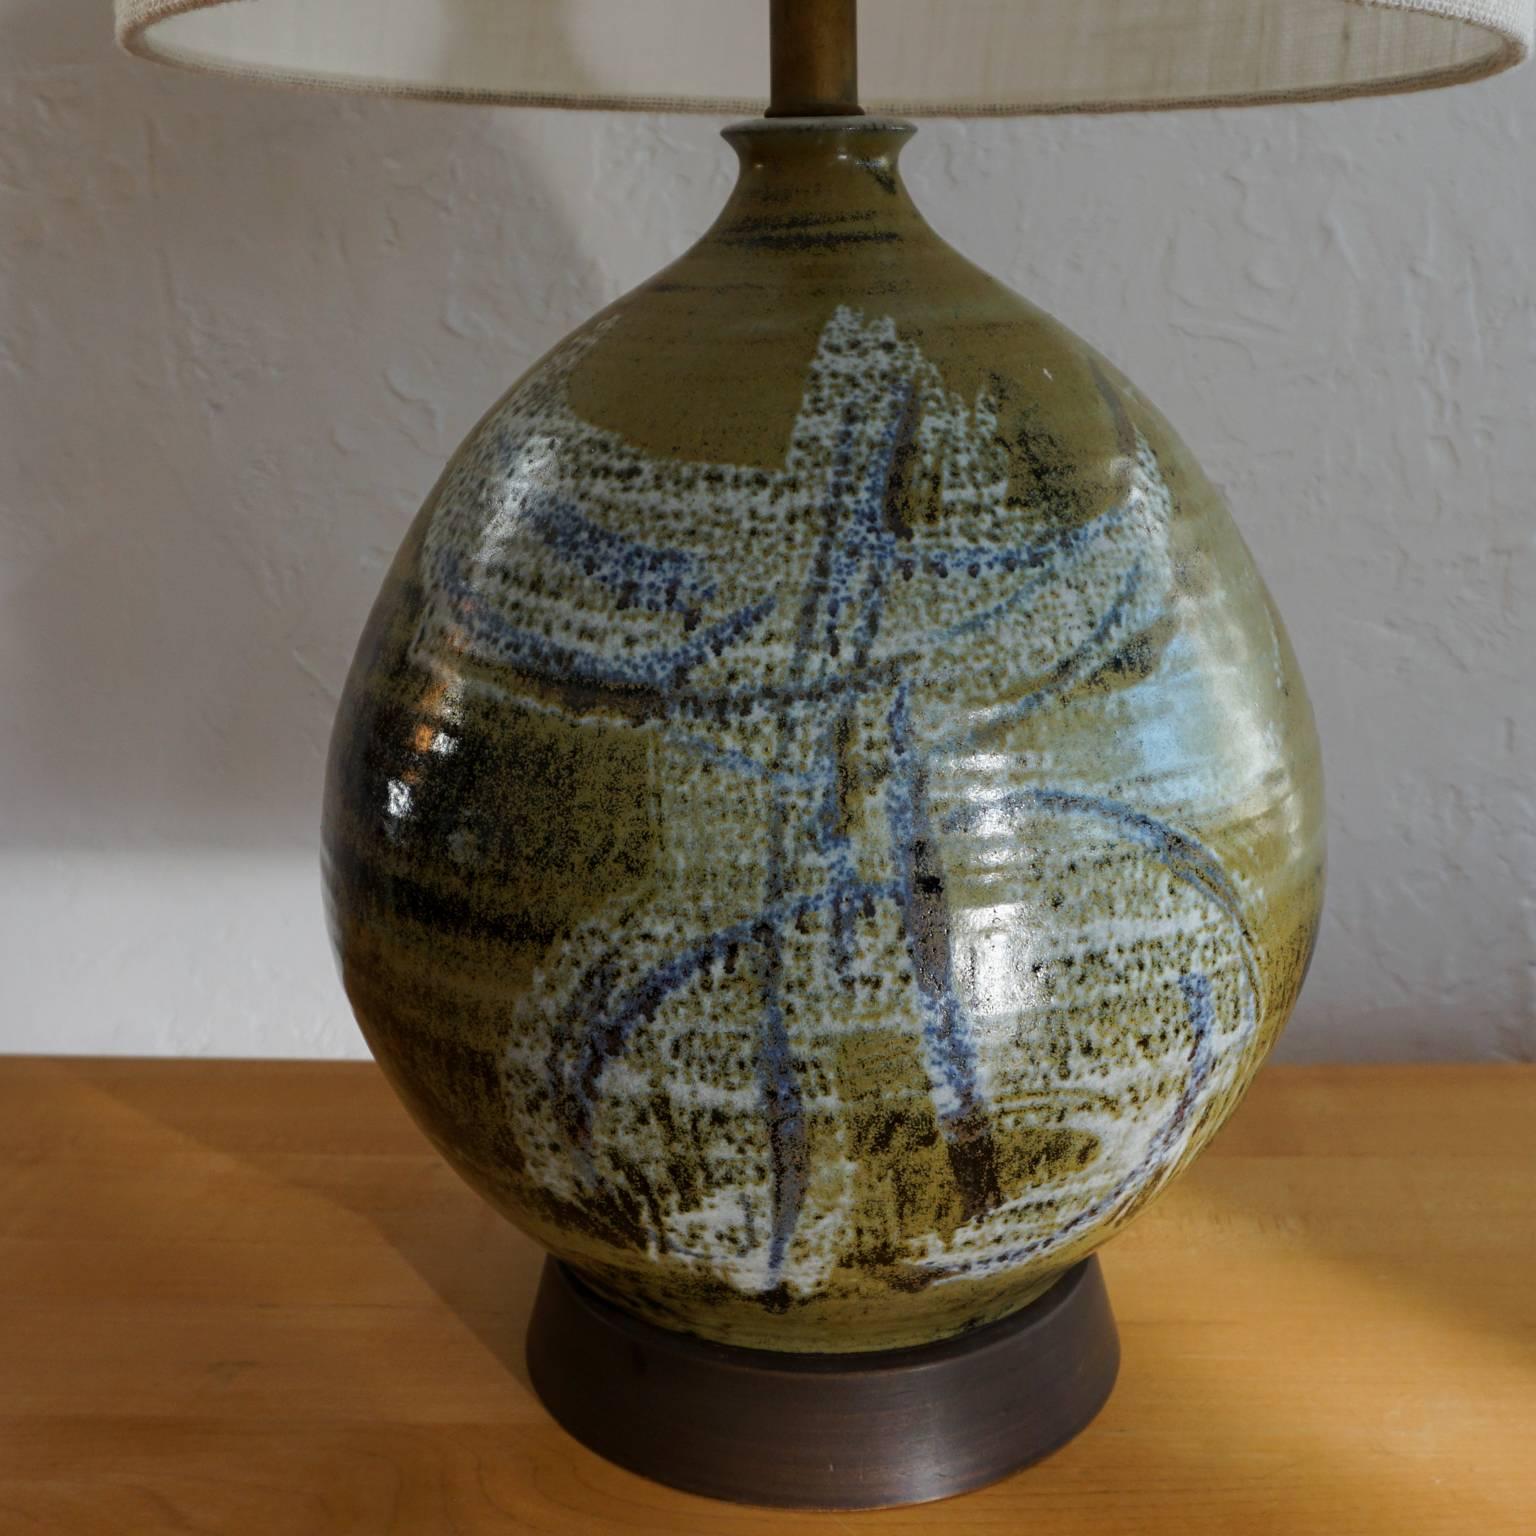 1960s hand-thrown glazed pottery lamp by California ceramic artist, Joel Edwards. Signed in the clay. 

Joel Edwards, Los Angeles, CA. Studied at Otis Art Institute under Peter Voulkos. Creator of “Creative Crafts” magazine, 1960-1964.